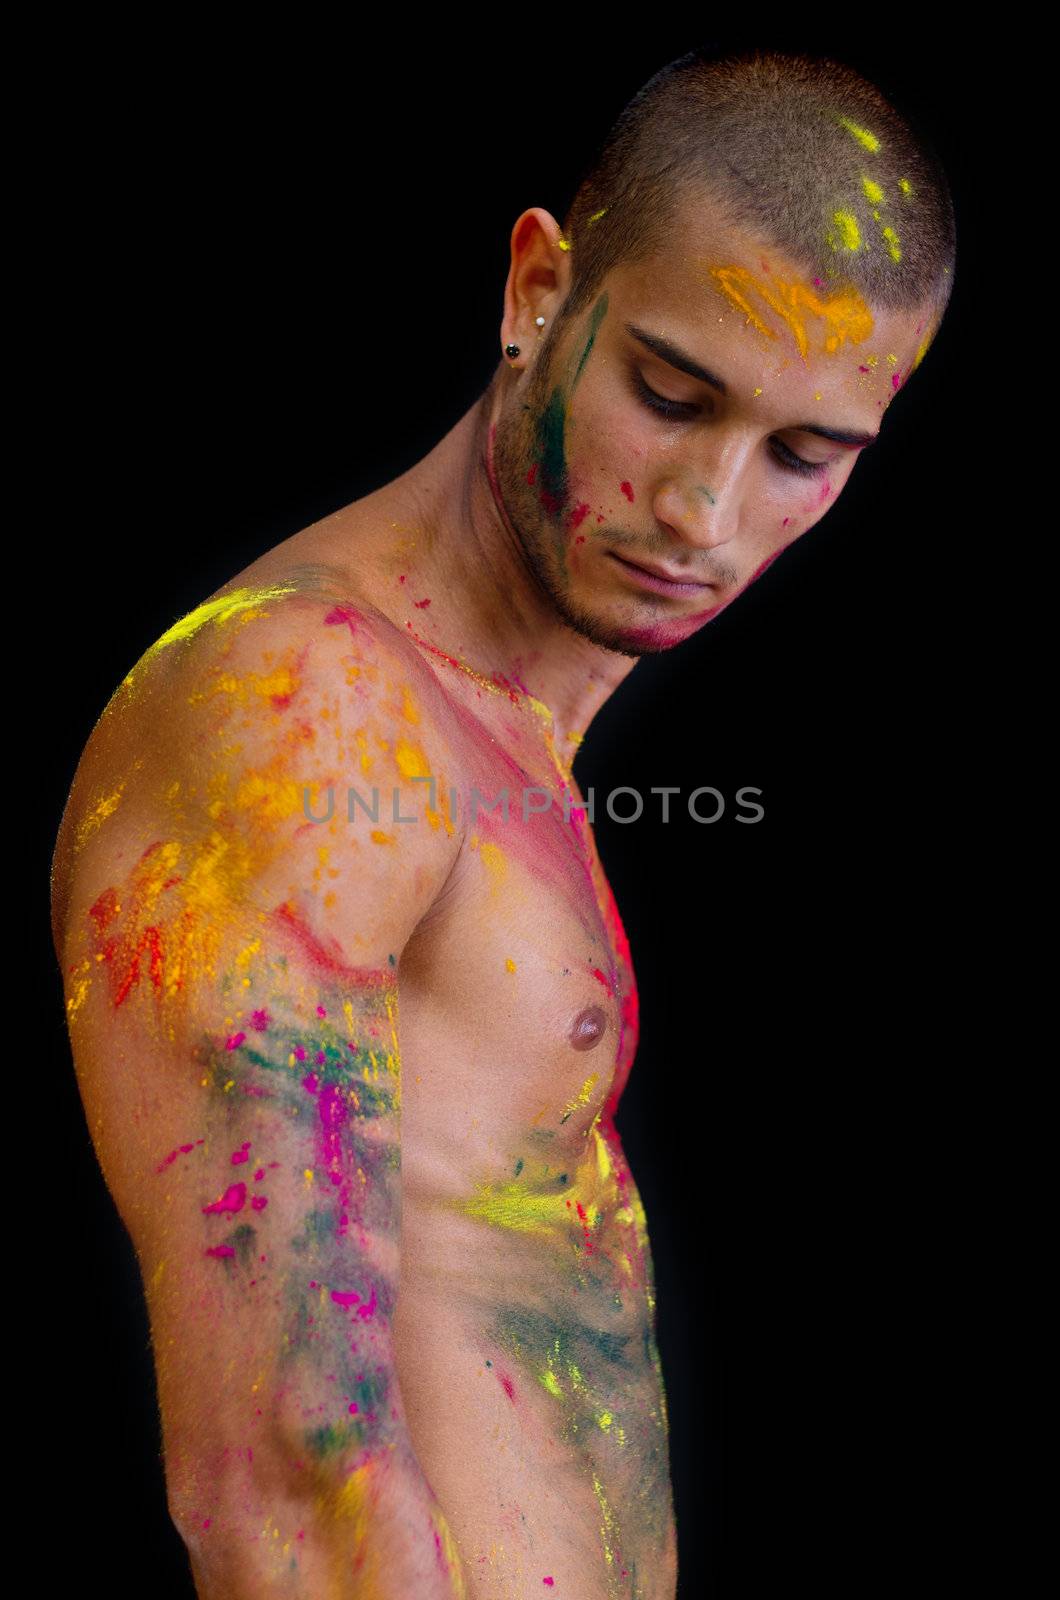 Handsome young man with skin all painted with colors looking down, isolated on black background